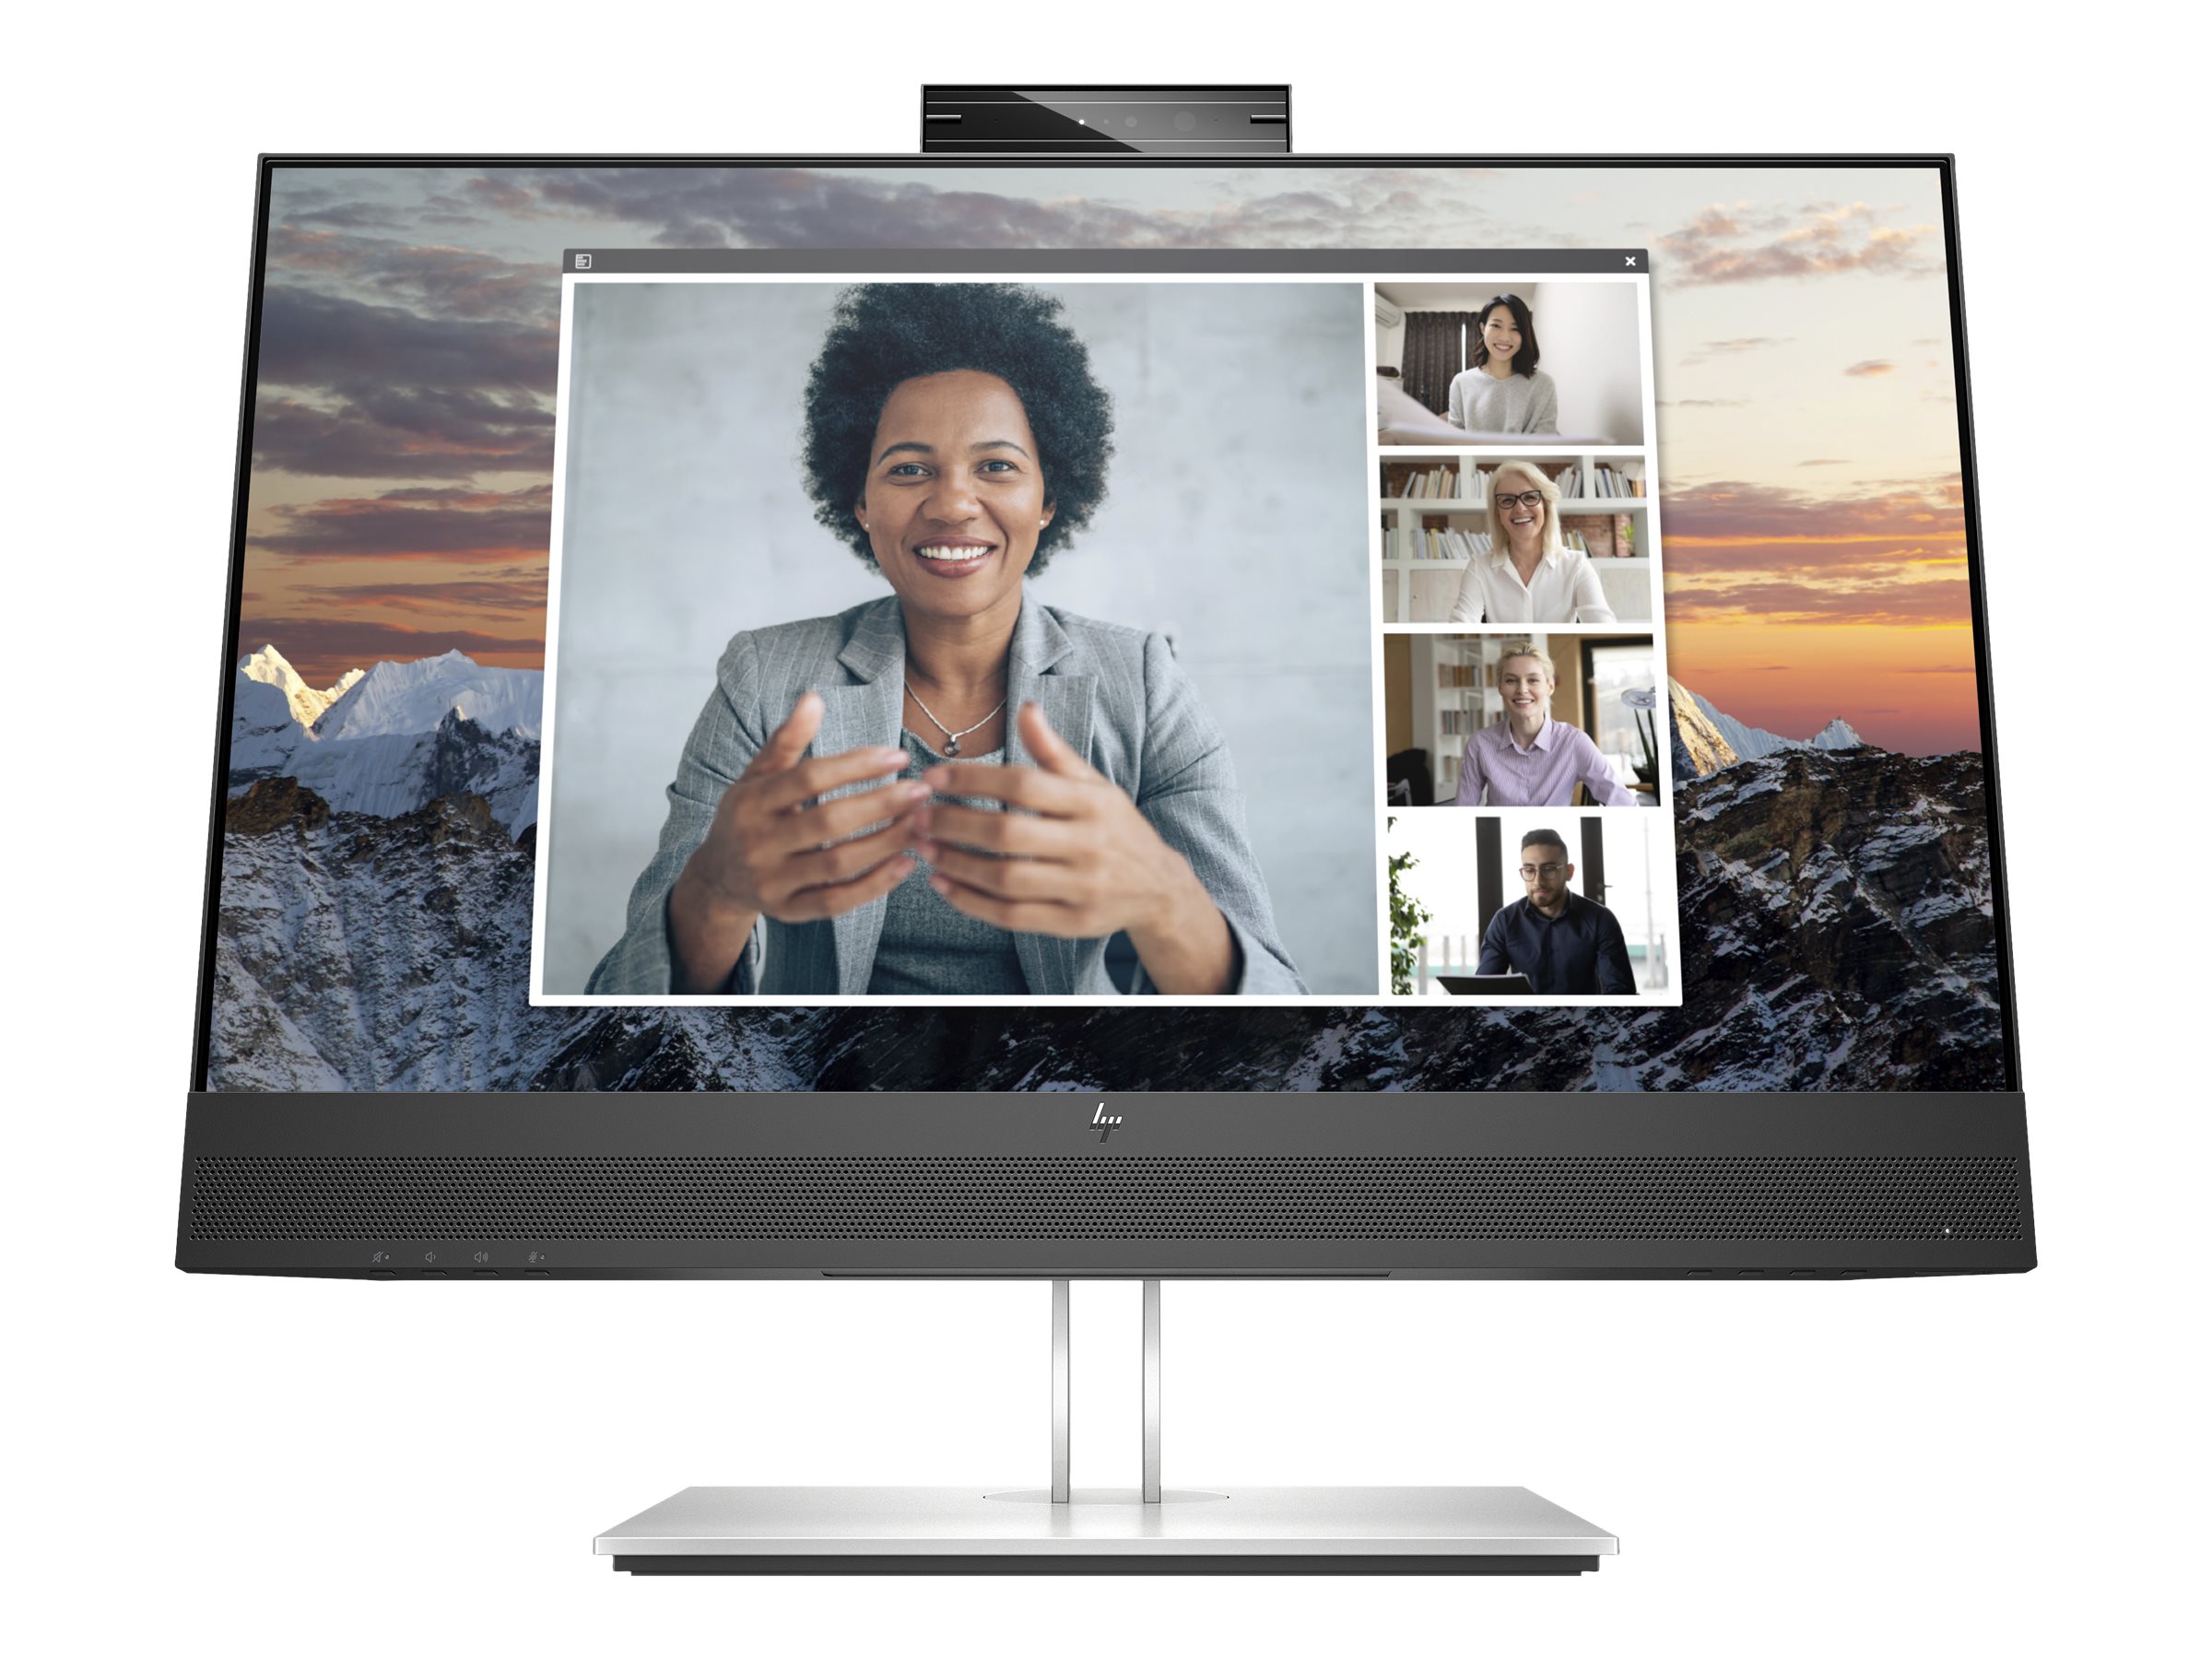 HP E24m G4 Conferencing - E-Series - LED-Monitor - 60.5 cm (23.8") - 1920 x 1080 Full HD (1080p) @ 75 Hz - IPS